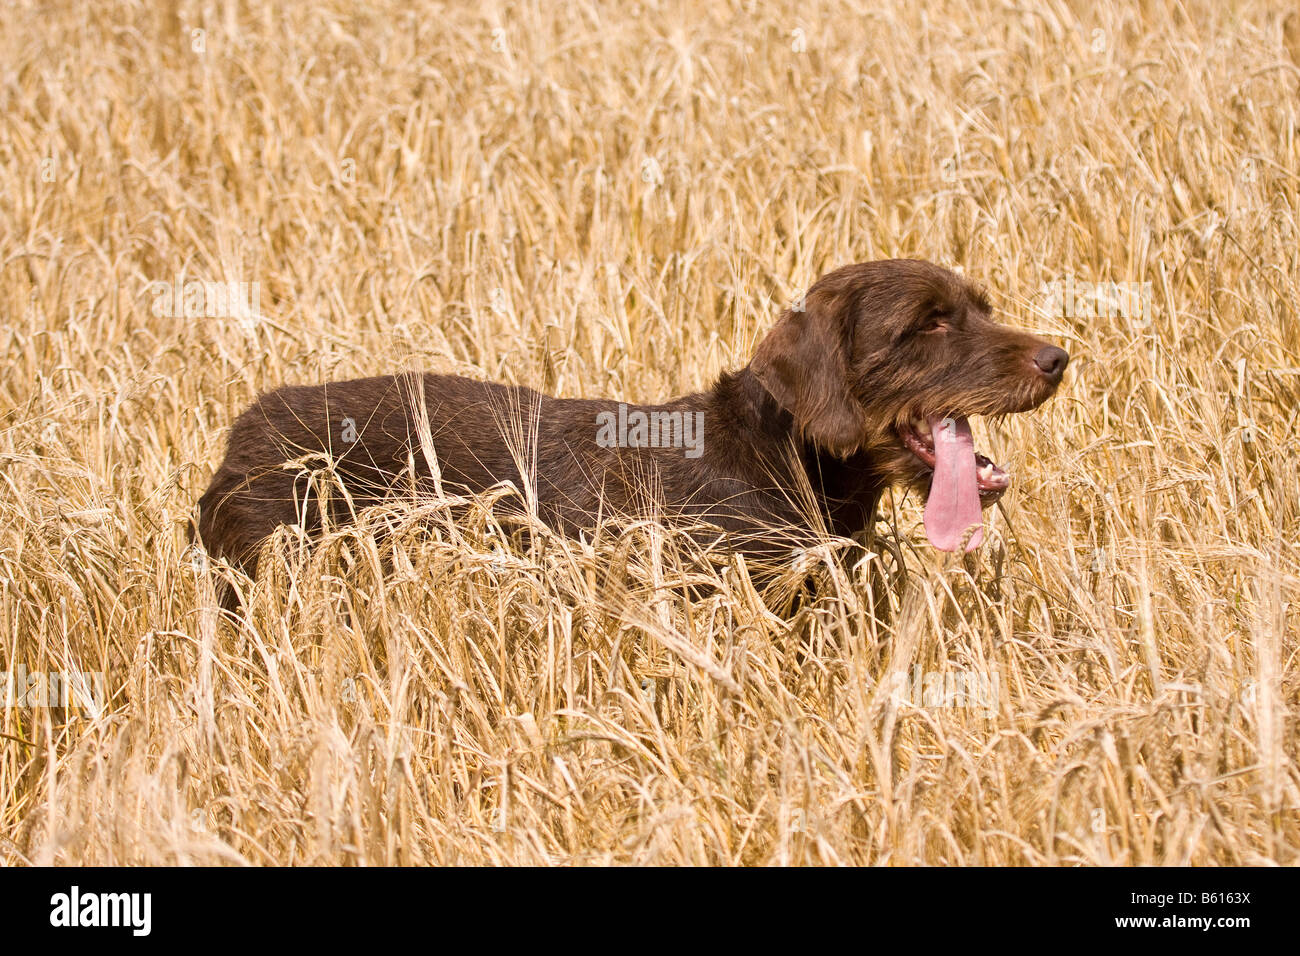 Pudelpointer, hunting dog, in a grain field Stock Photo